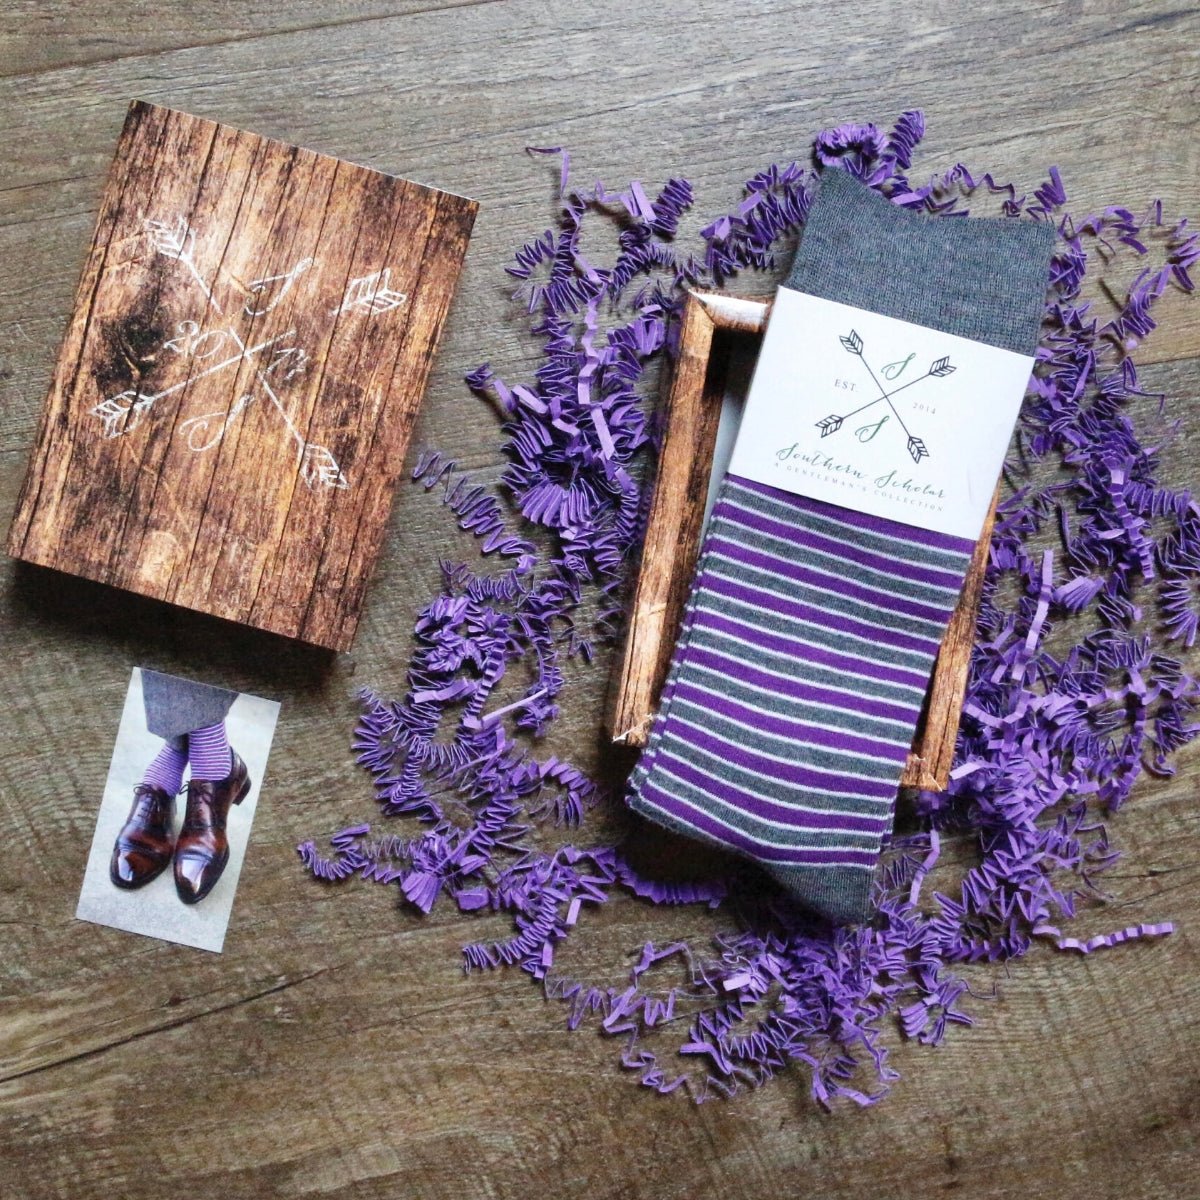 A pair of purple, grey, and white striped men's dress socks and gift box